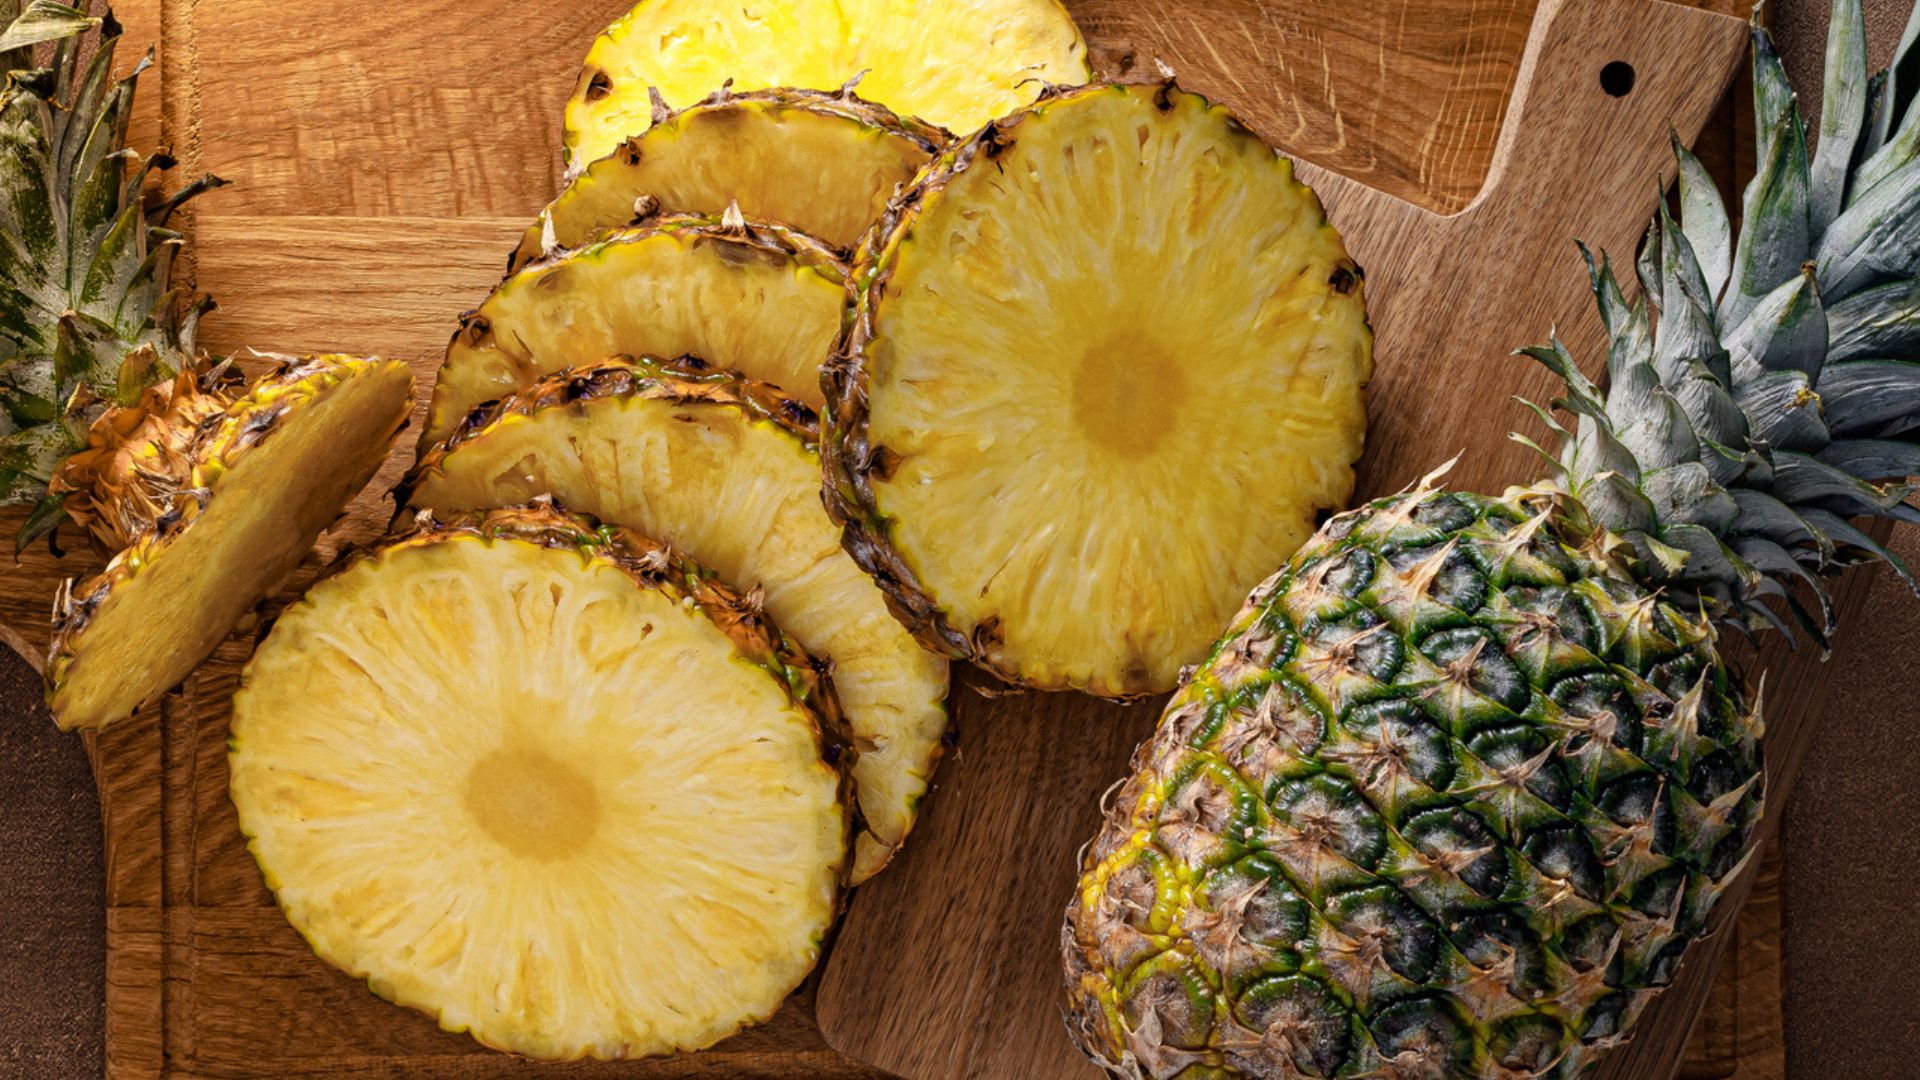 Chopped and whole pinapple sitting on wooden chopping board